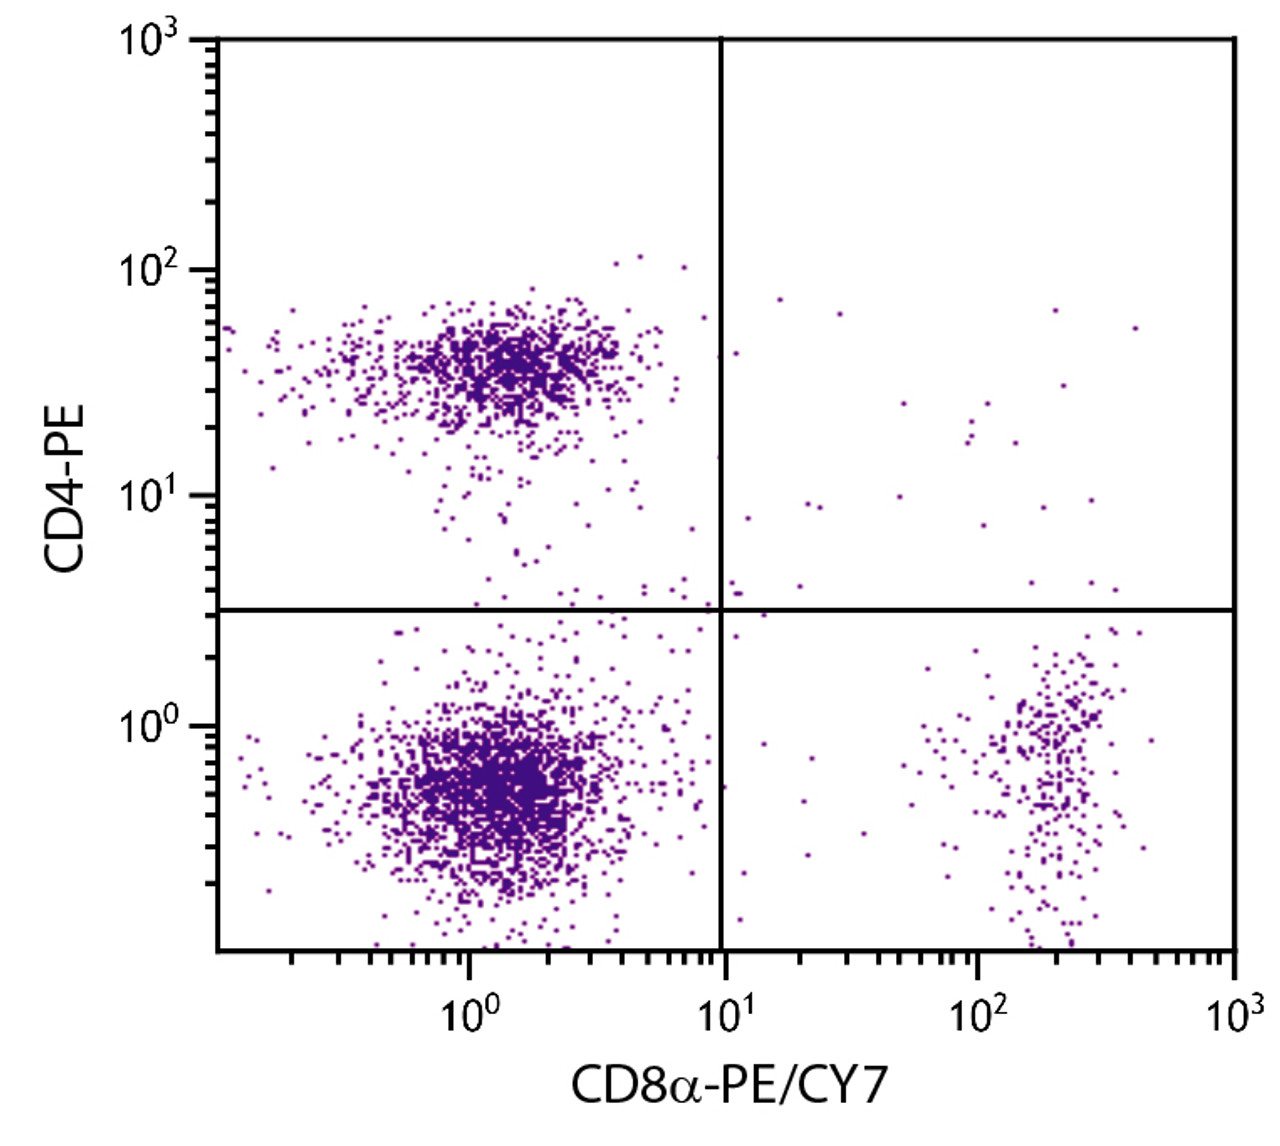 BALB/c mouse splenocytes were stained with Rat Anti-Mouse CD8?-PE/CY7 (Cat. No. 98-623) and Rat Anti-Mouse CD4-PE .